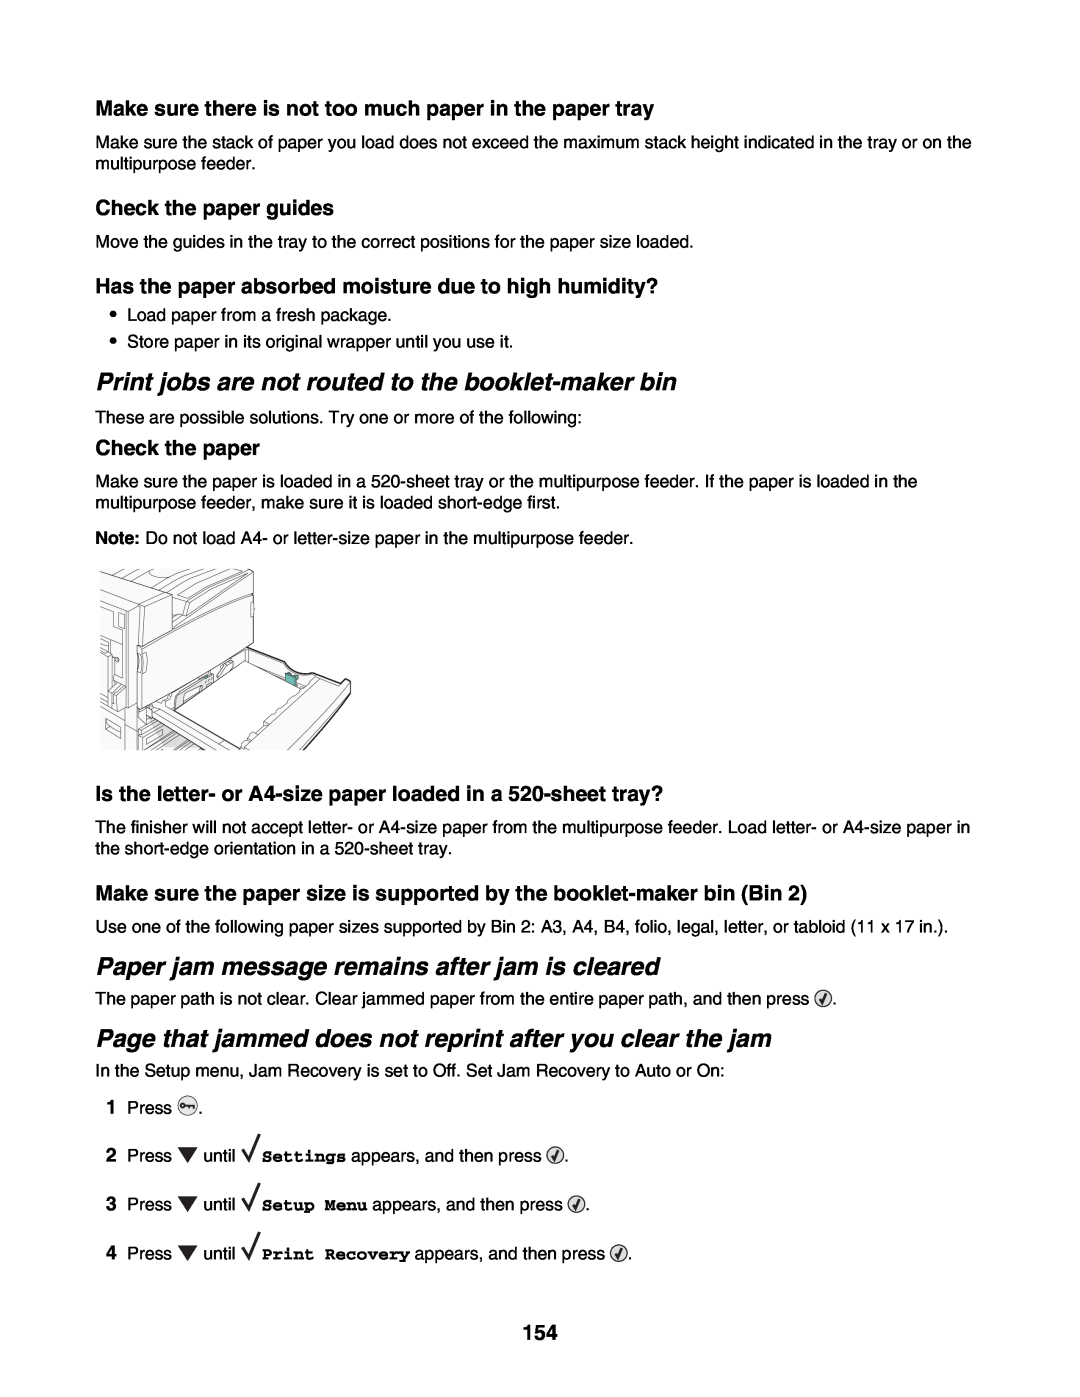 Lexmark C935 manual Print jobs are not routed to the booklet-maker bin, Paper jam message remains after jam is cleared 